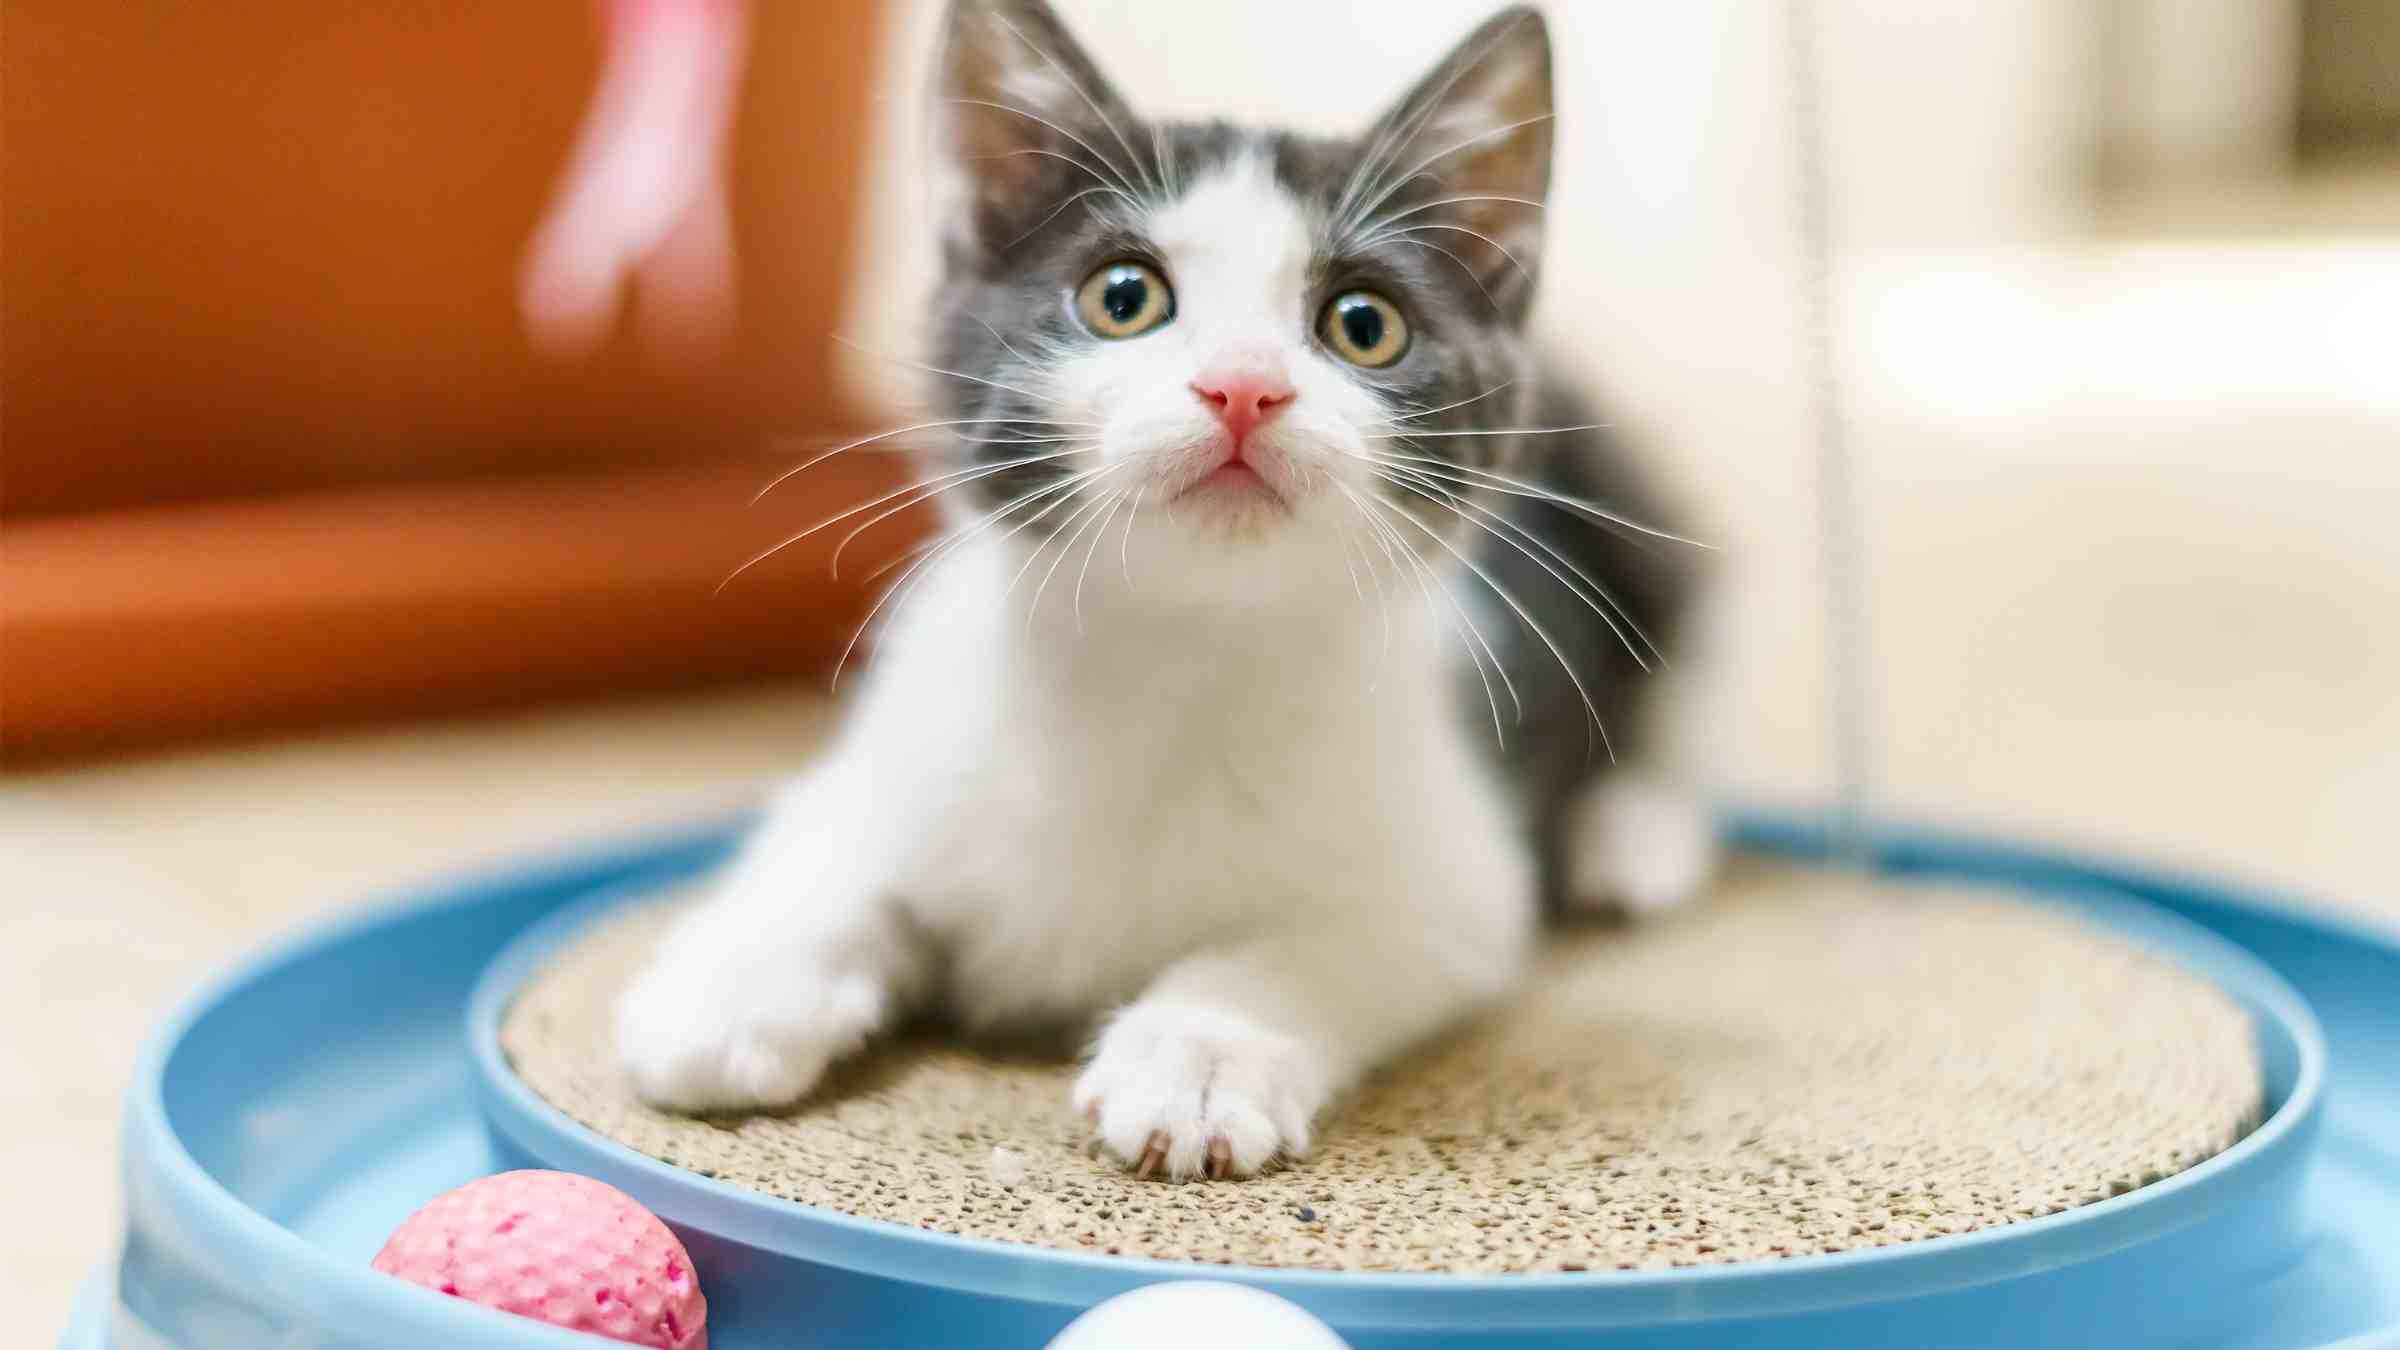 Adorable grey and white kitten enjoying playtime with a blue scratcher toy, engaging in healthy, stimulating activity at home